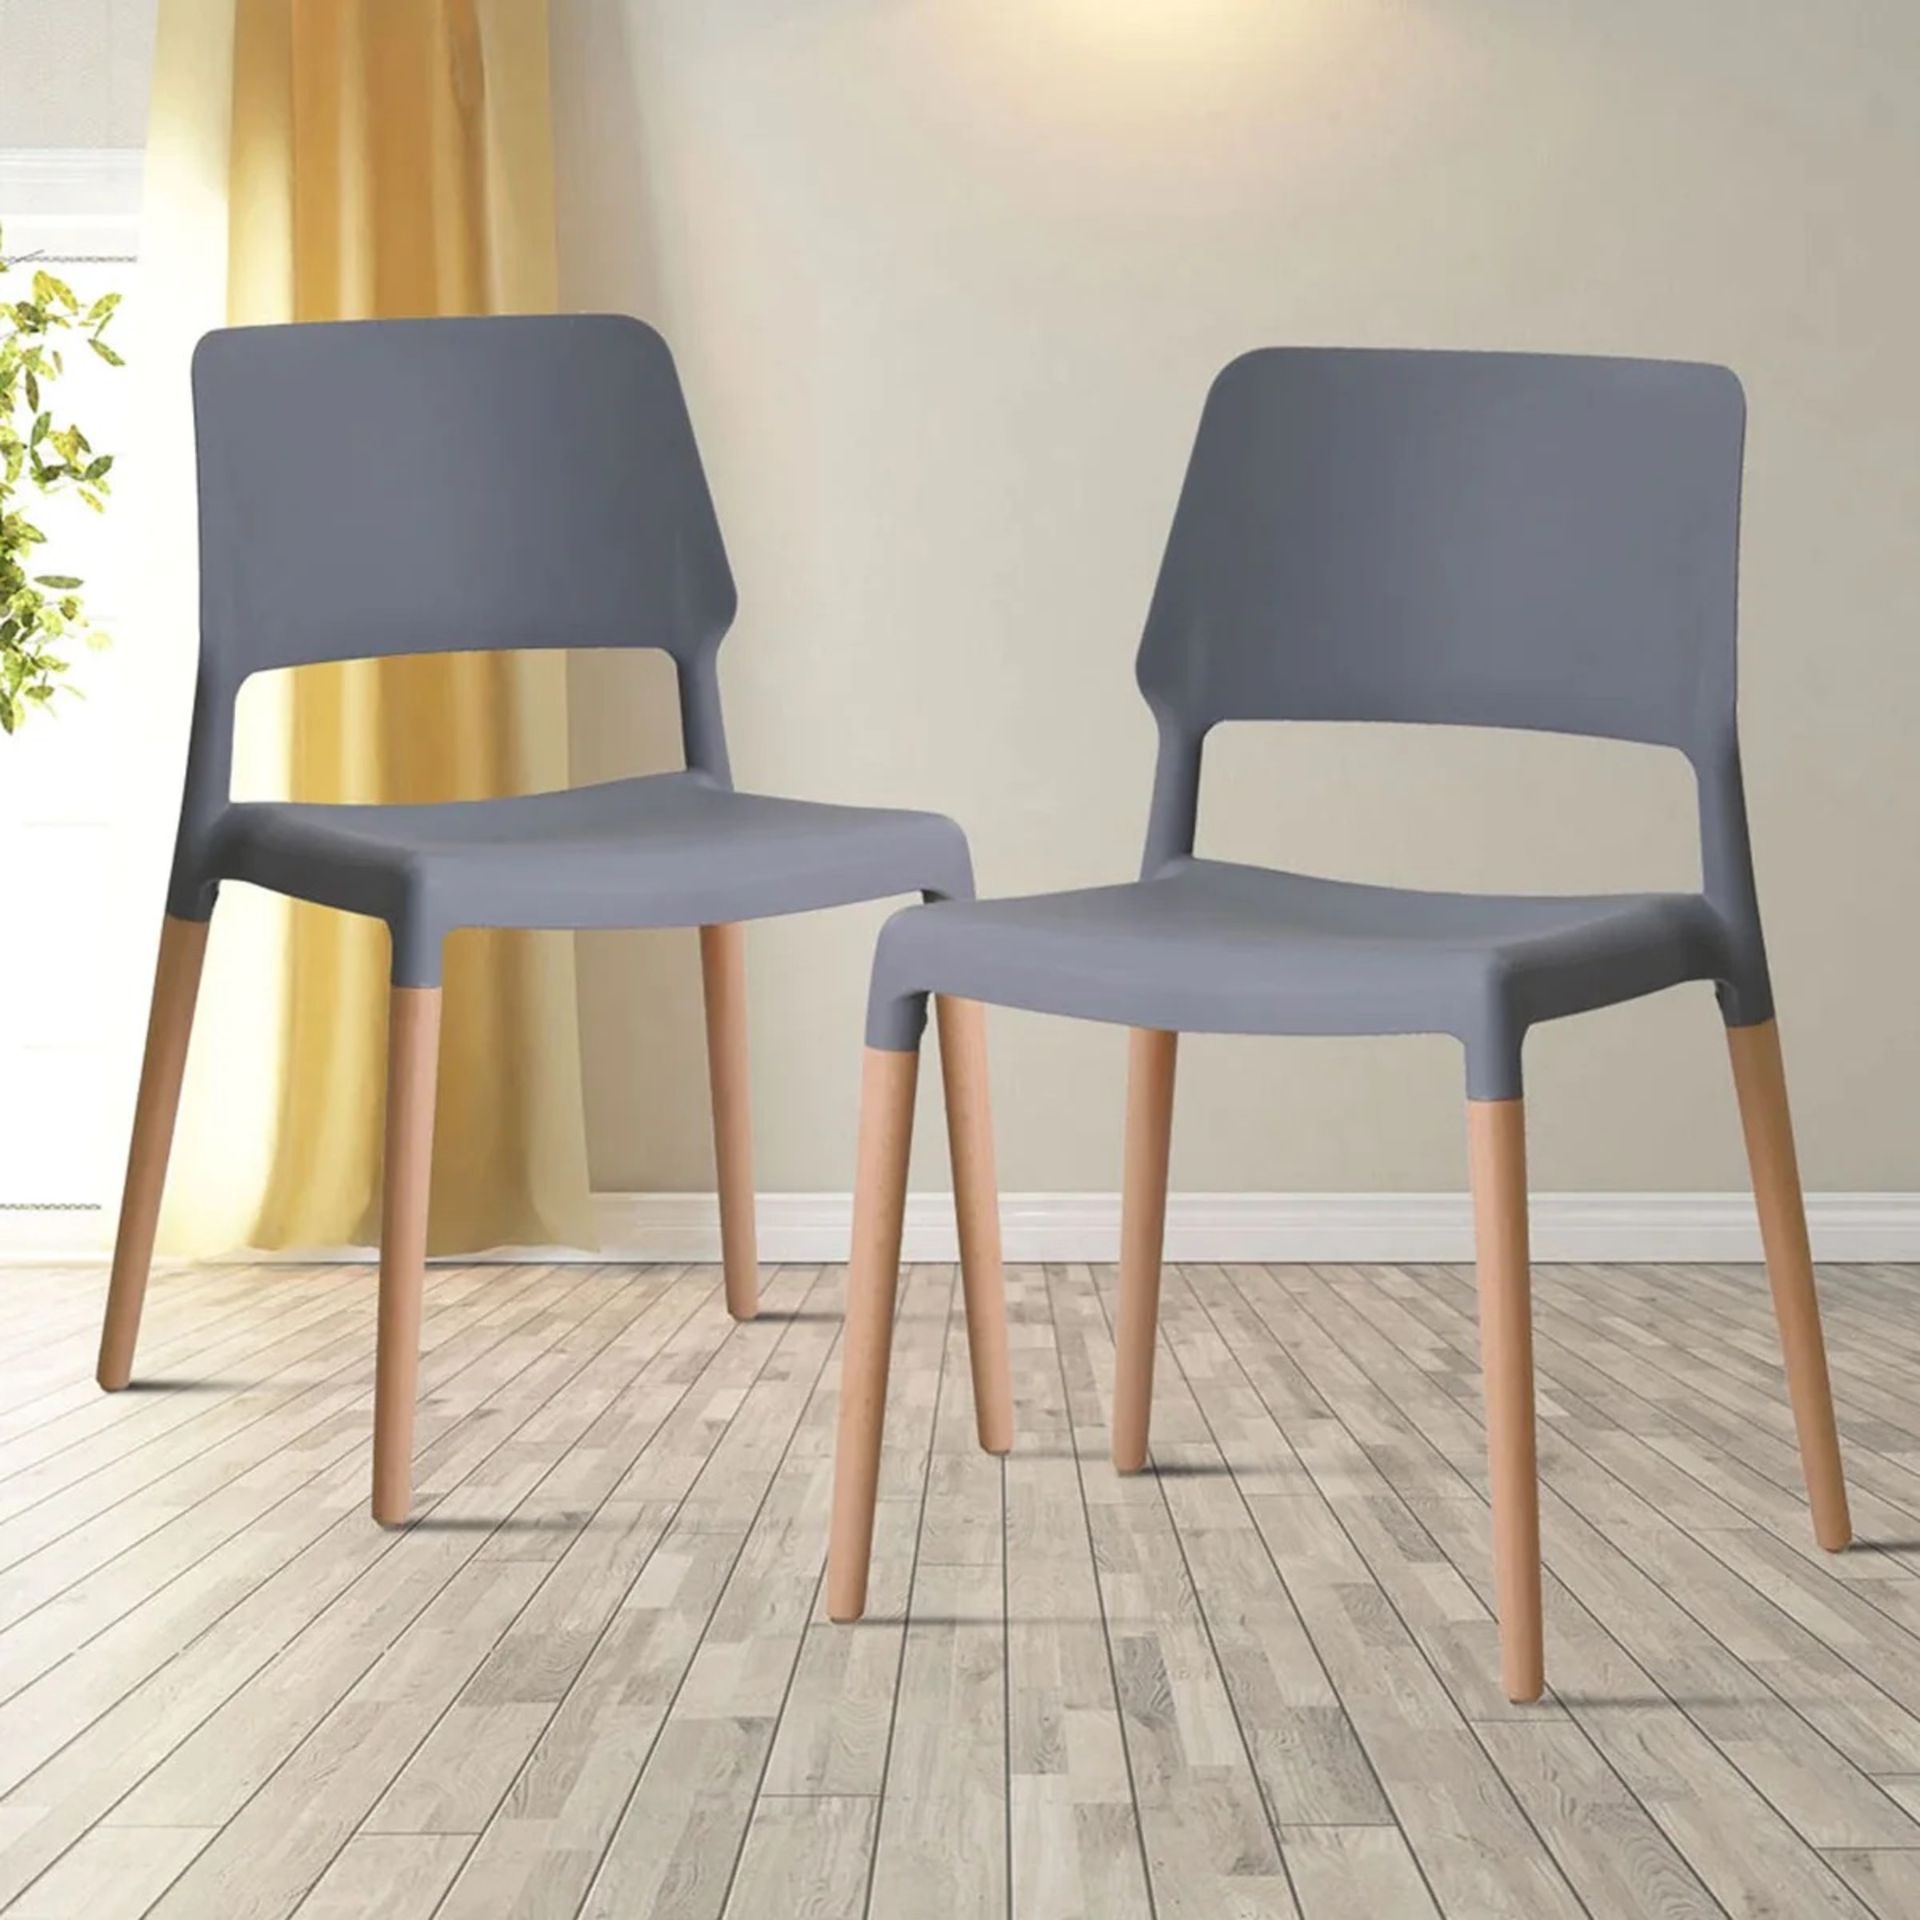 A1 PRODUCT NEW -   RIVA PAIR OF DINING CHAIRS IN GREY DURABLE PLASTIC - RRP Â£159 PER PAIR